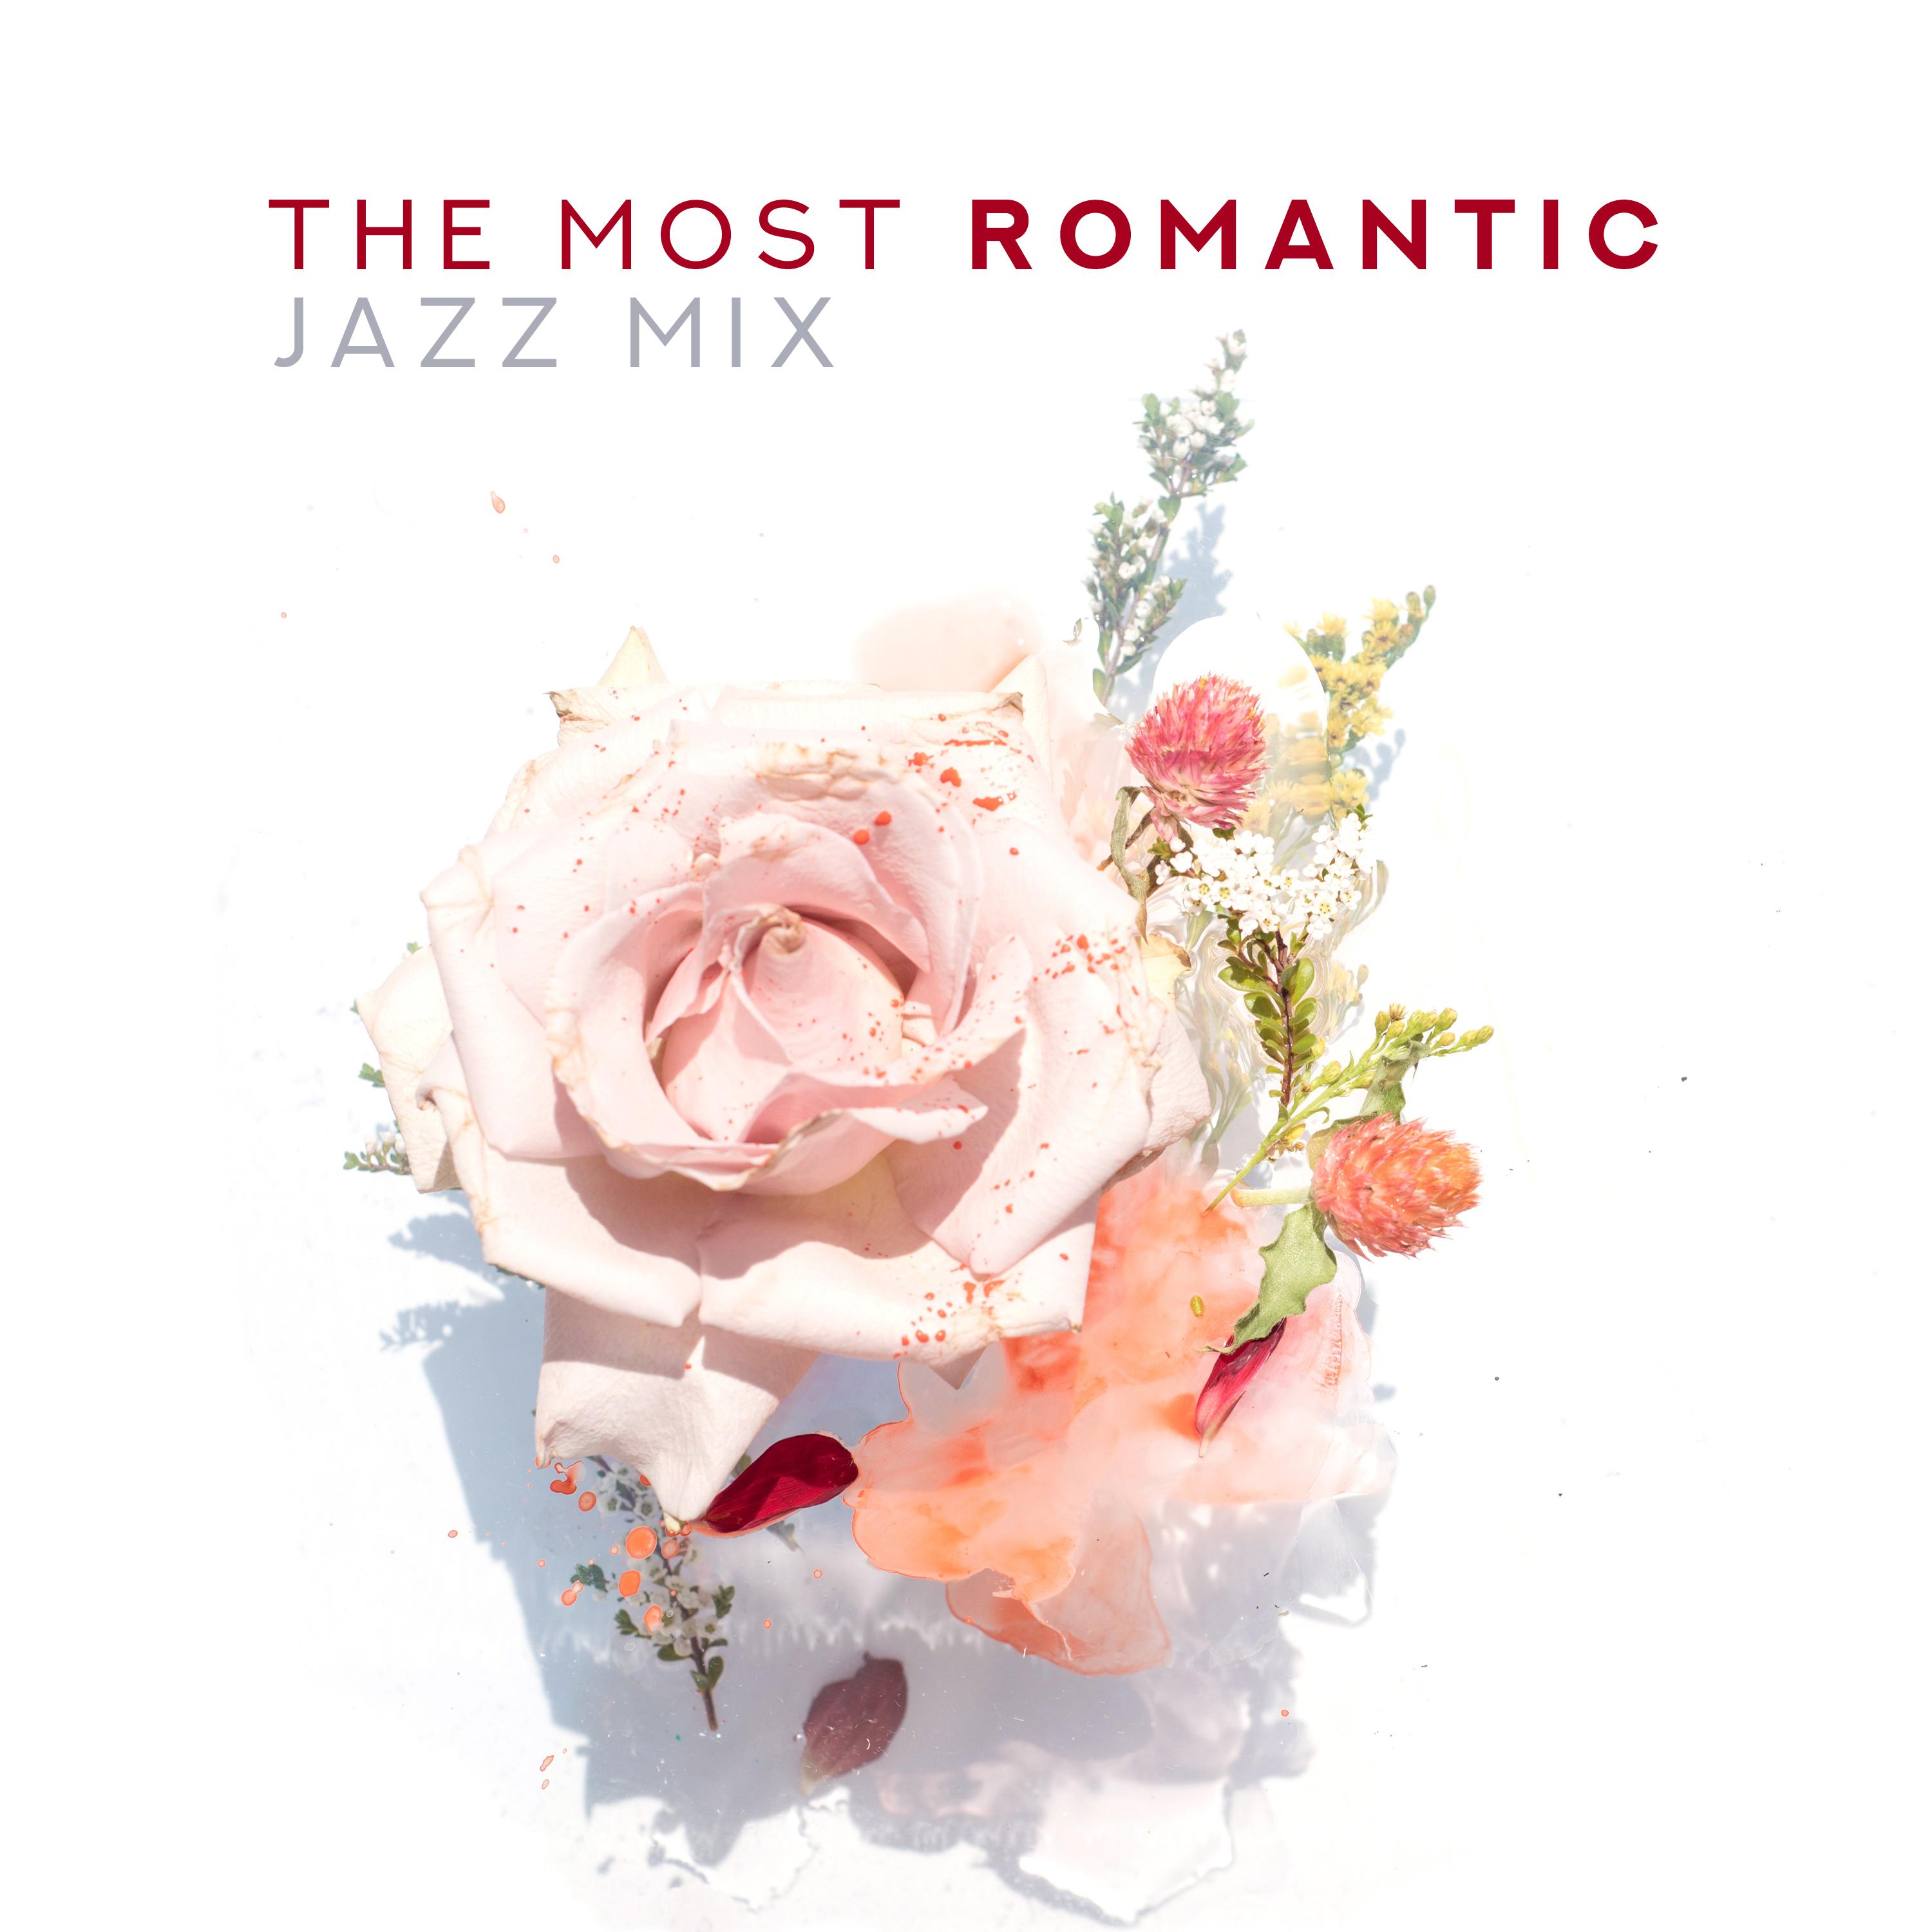 The Most Romantic Jazz Mix: 2019 Smooth Jazz Instrumental Music Compilation, Slow & Sensual Songs Perfect for Couple’s Private Moments in Restaurant or at Home, Vintage Piano, Sax & Trombone Sounds